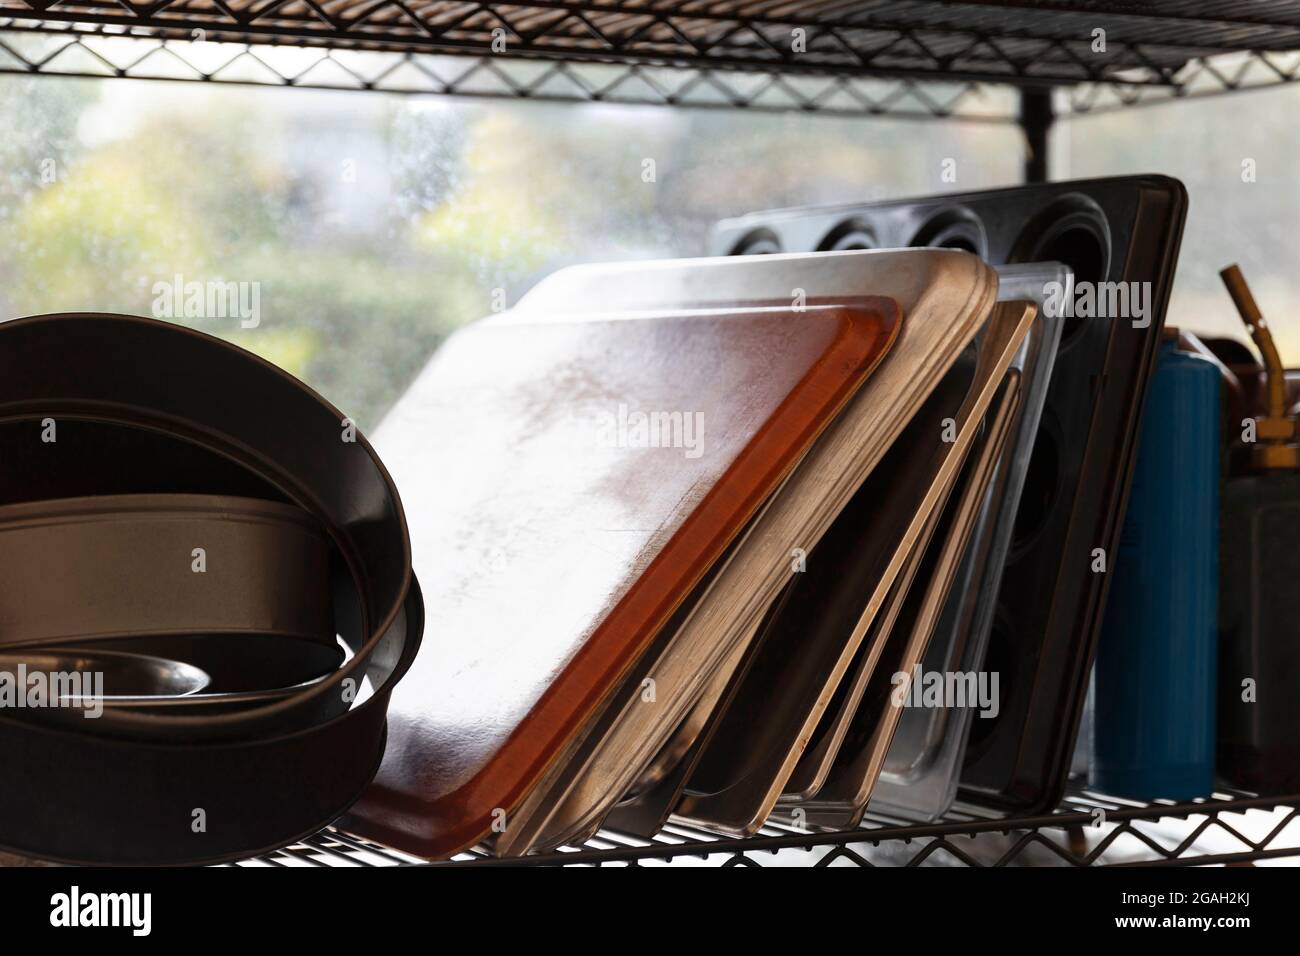 Commercial kitchen baking trays and utensils stacked together on rack. Stock Photo